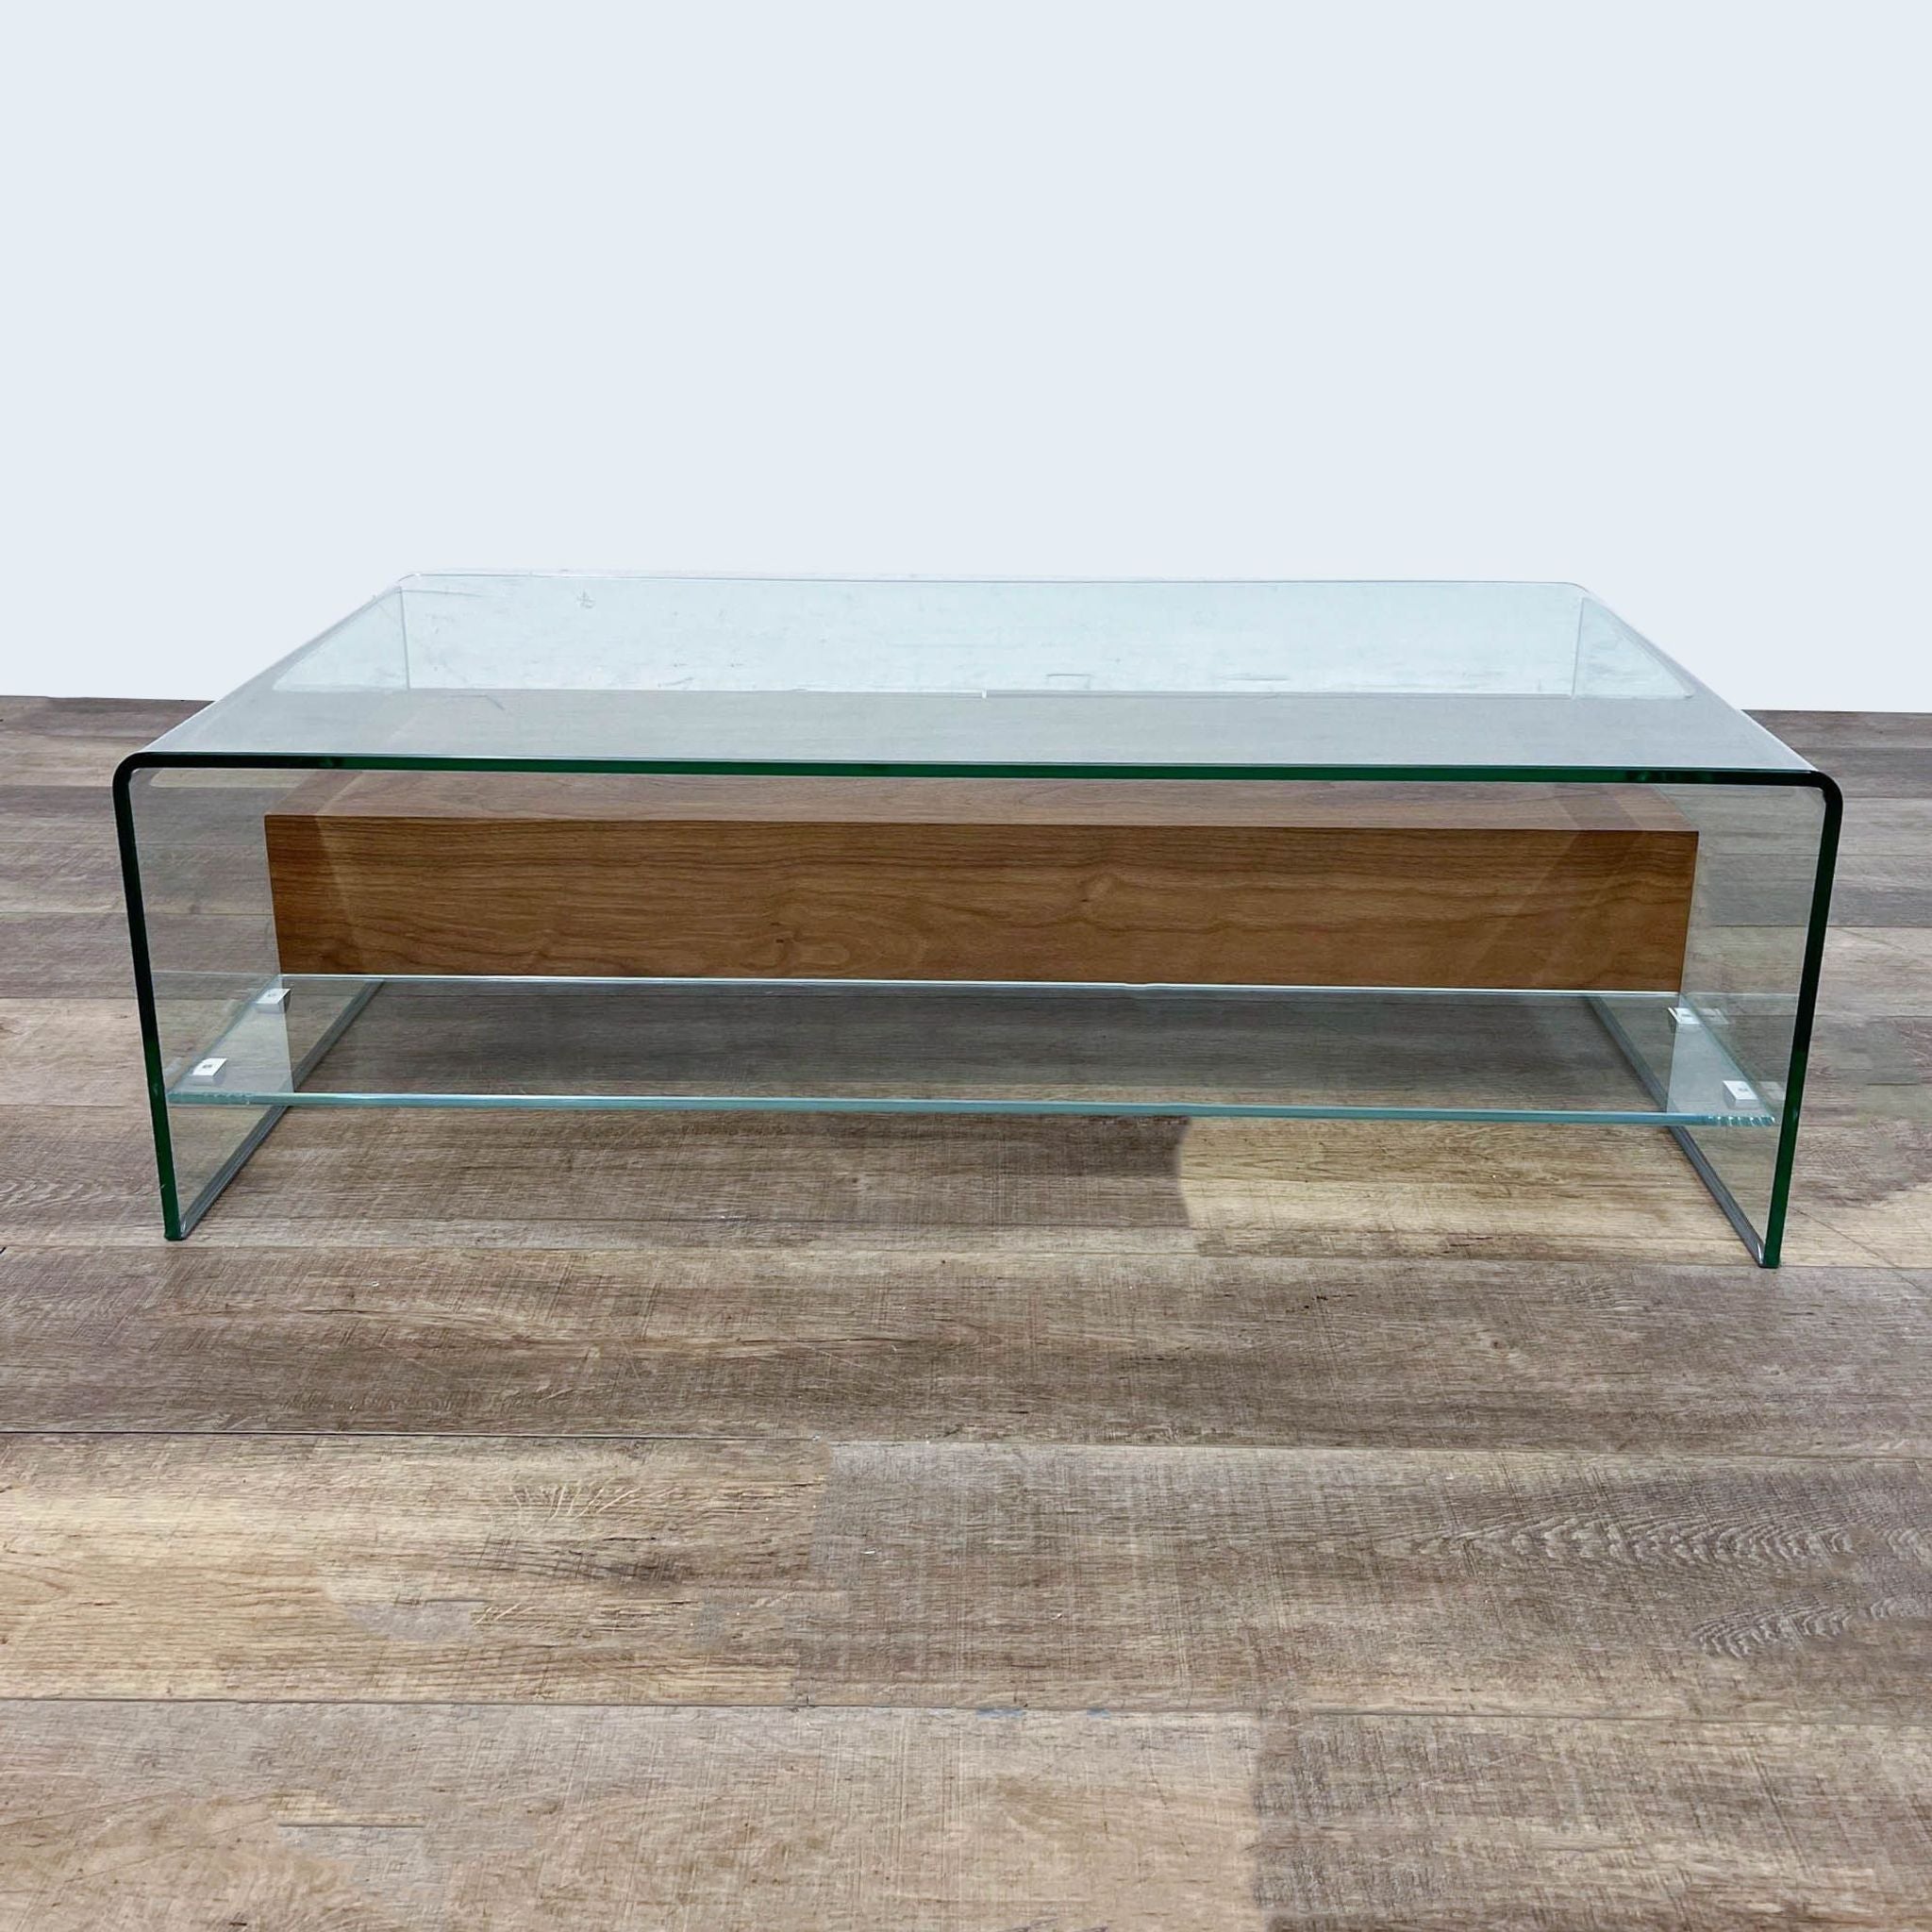 Zuo Modern coffee table featuring a glass waterfall design with two integrated walnut drawers, displayed on a wooden floor.